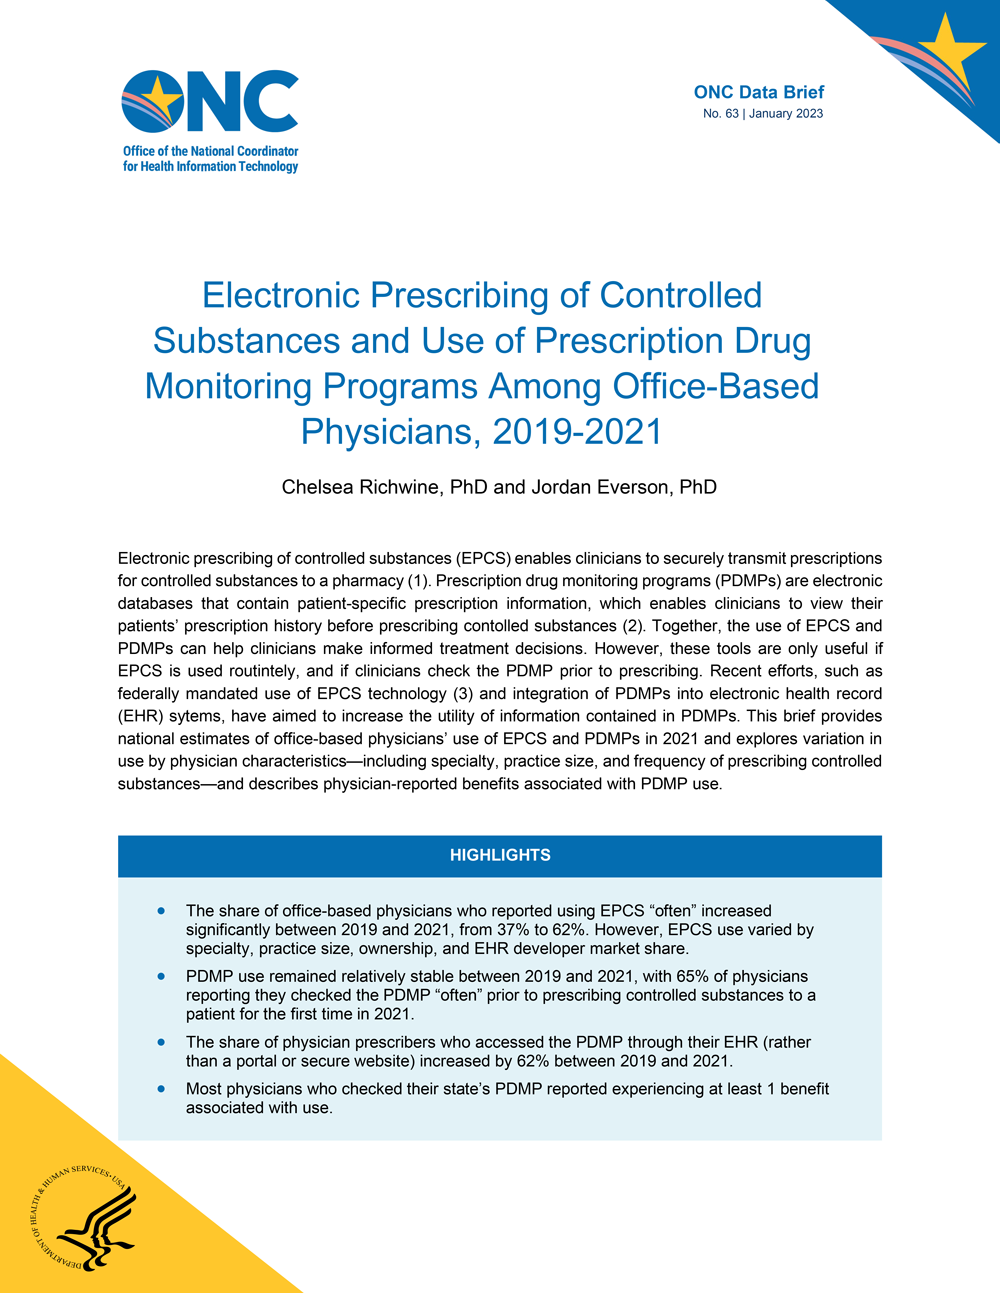 Electronic Prescribing of Controlled Substances and Use of Prescription Drug Monitoring Programs Among Office-Based Physicians, 2019-2021